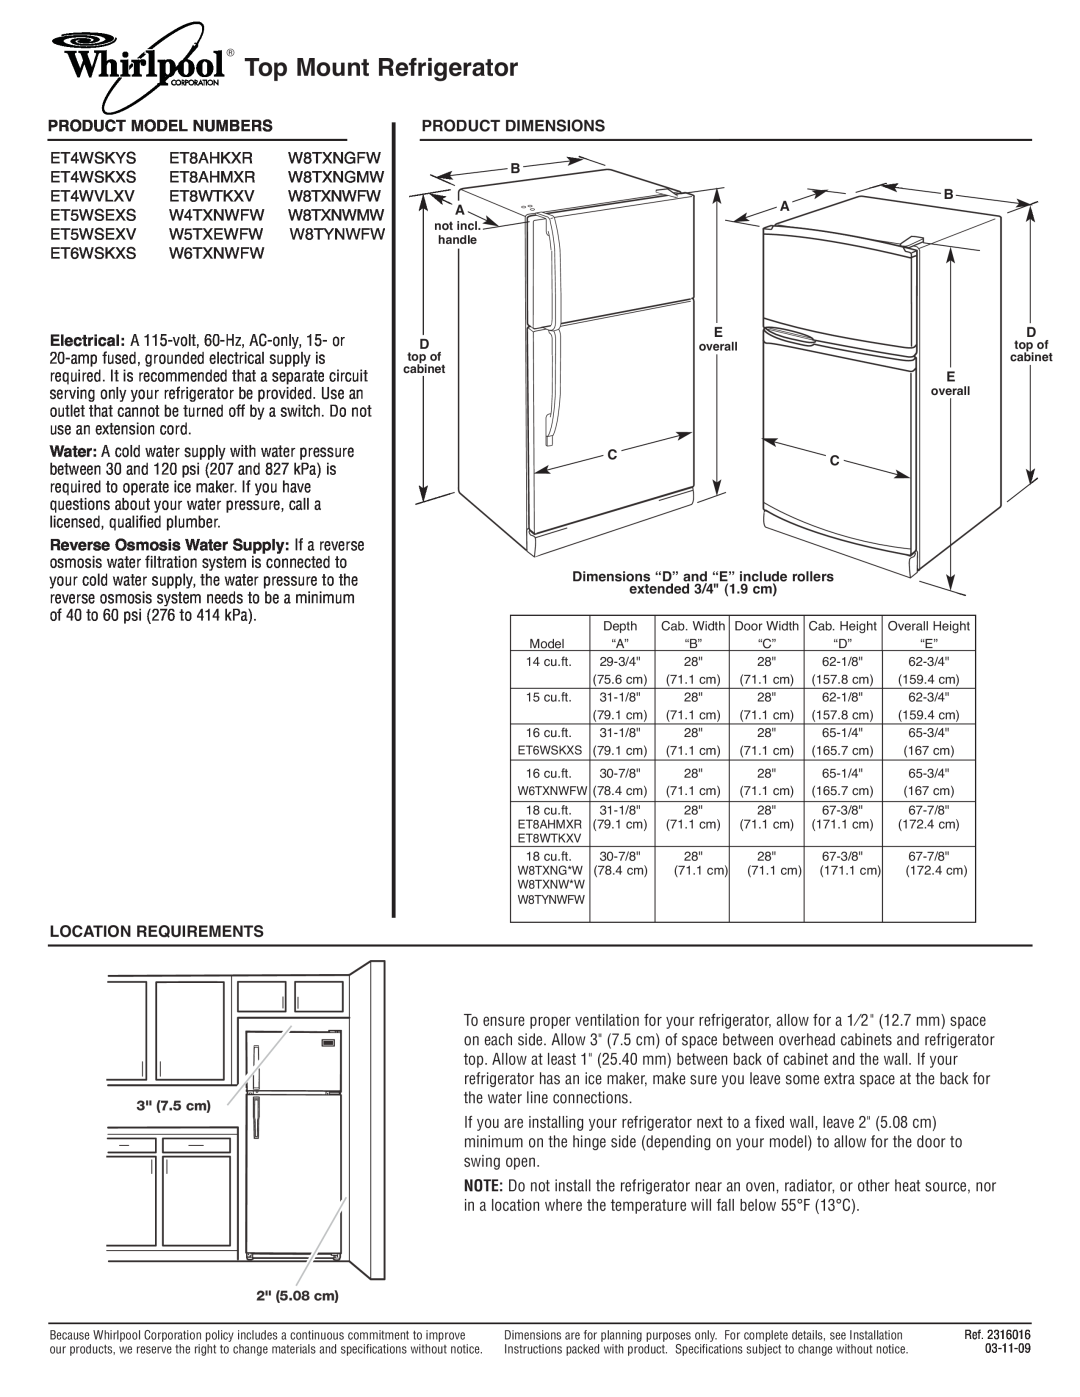 Whirlpool W8TXNGMW dimensions Top Mount Refrigerator, Product Model Numbers, Location Requirements, Product Dimensions 